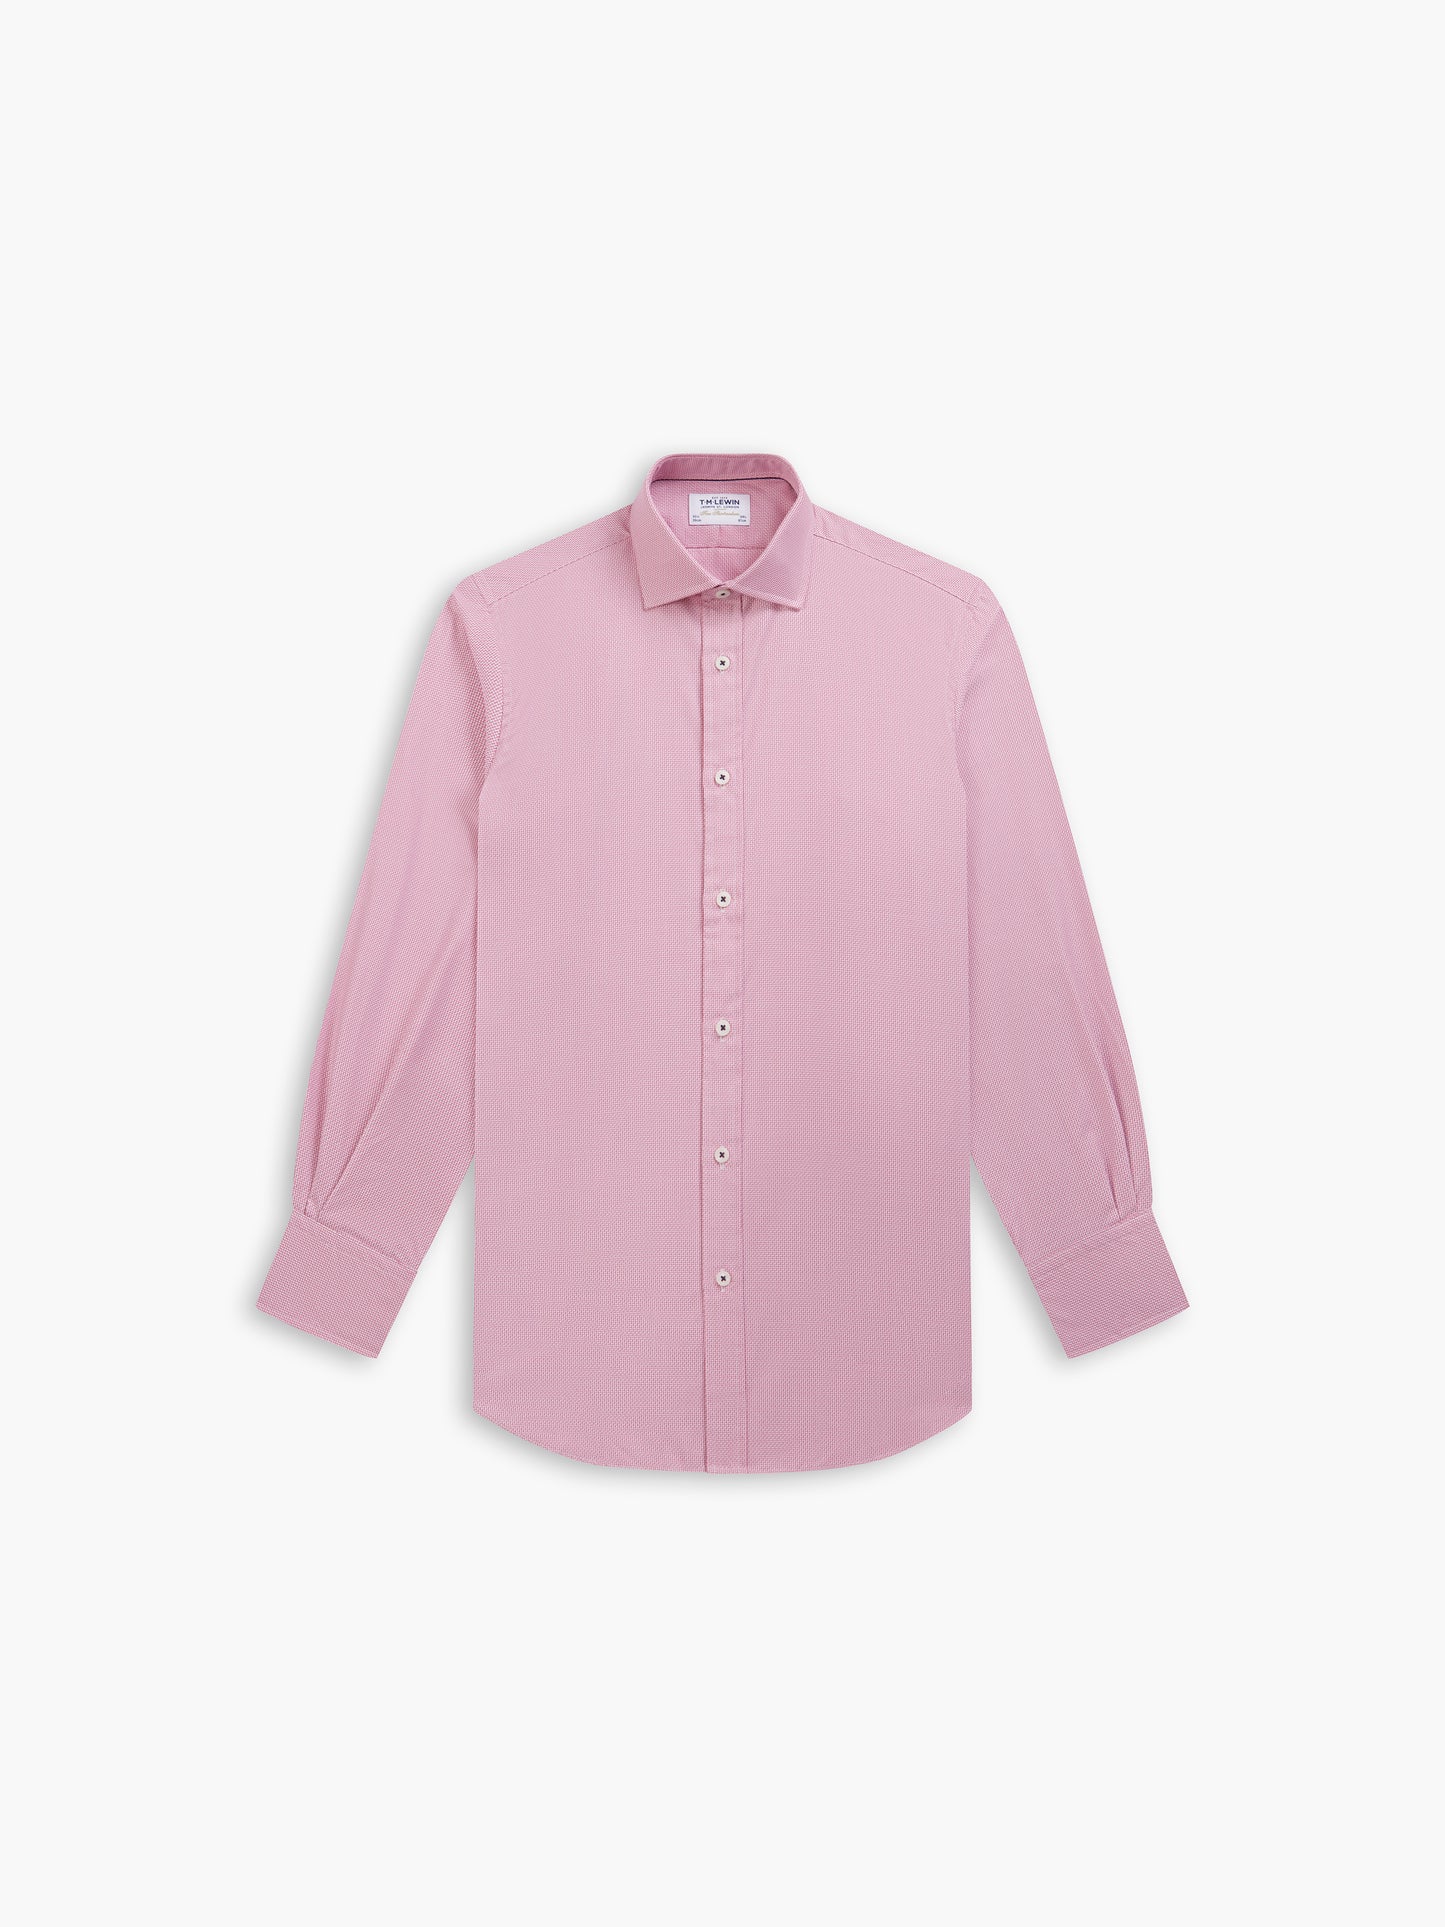 Magenta Aztec Textured Dobby Fitted Single Cuff Classic Collar Shirt